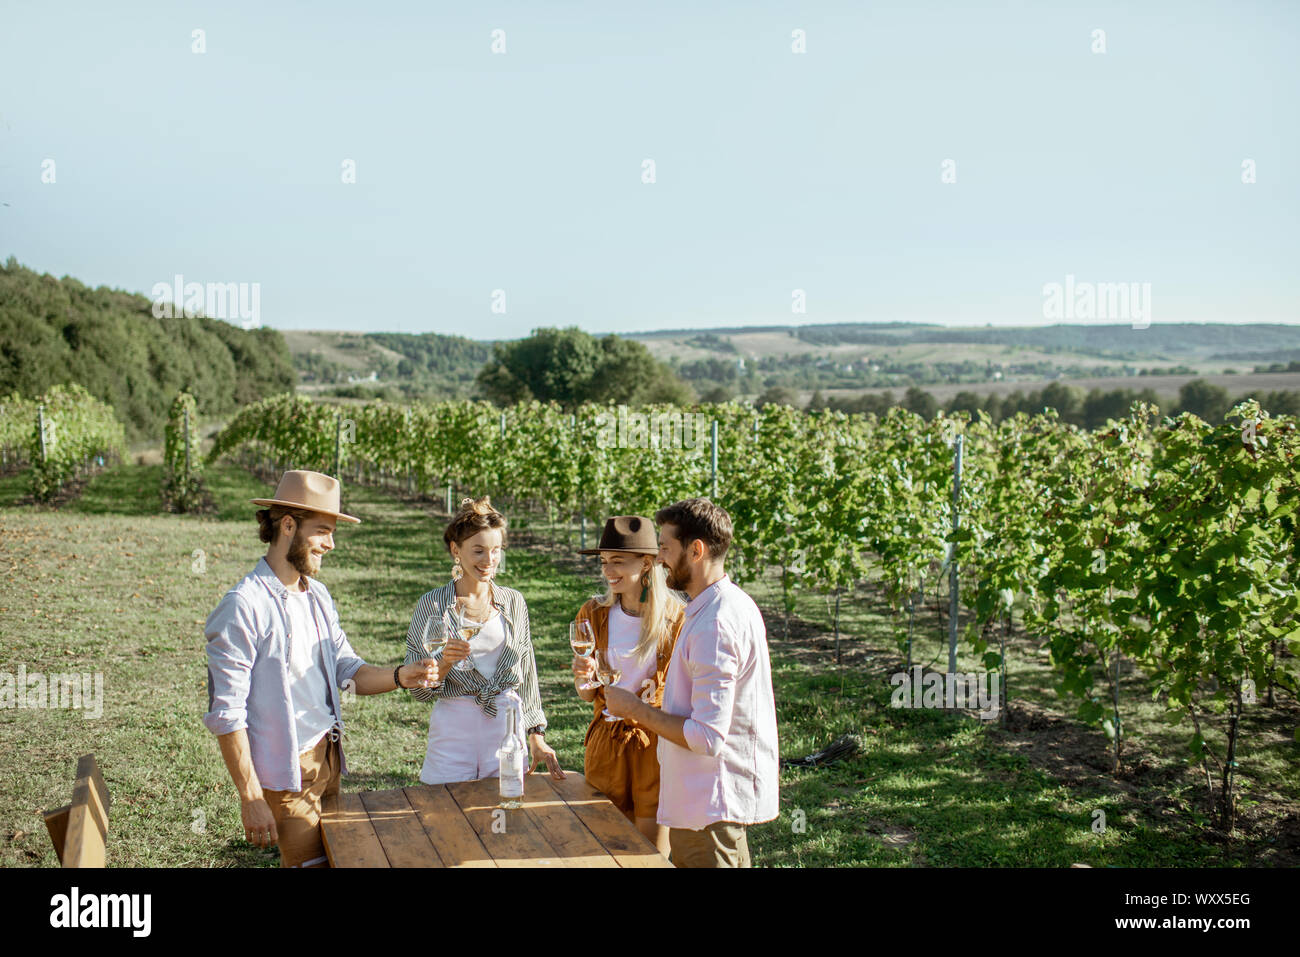 Group of young friends dressed casually tasting wine on the vineyard on a sunny summer morning, wide landscape view Stock Photo